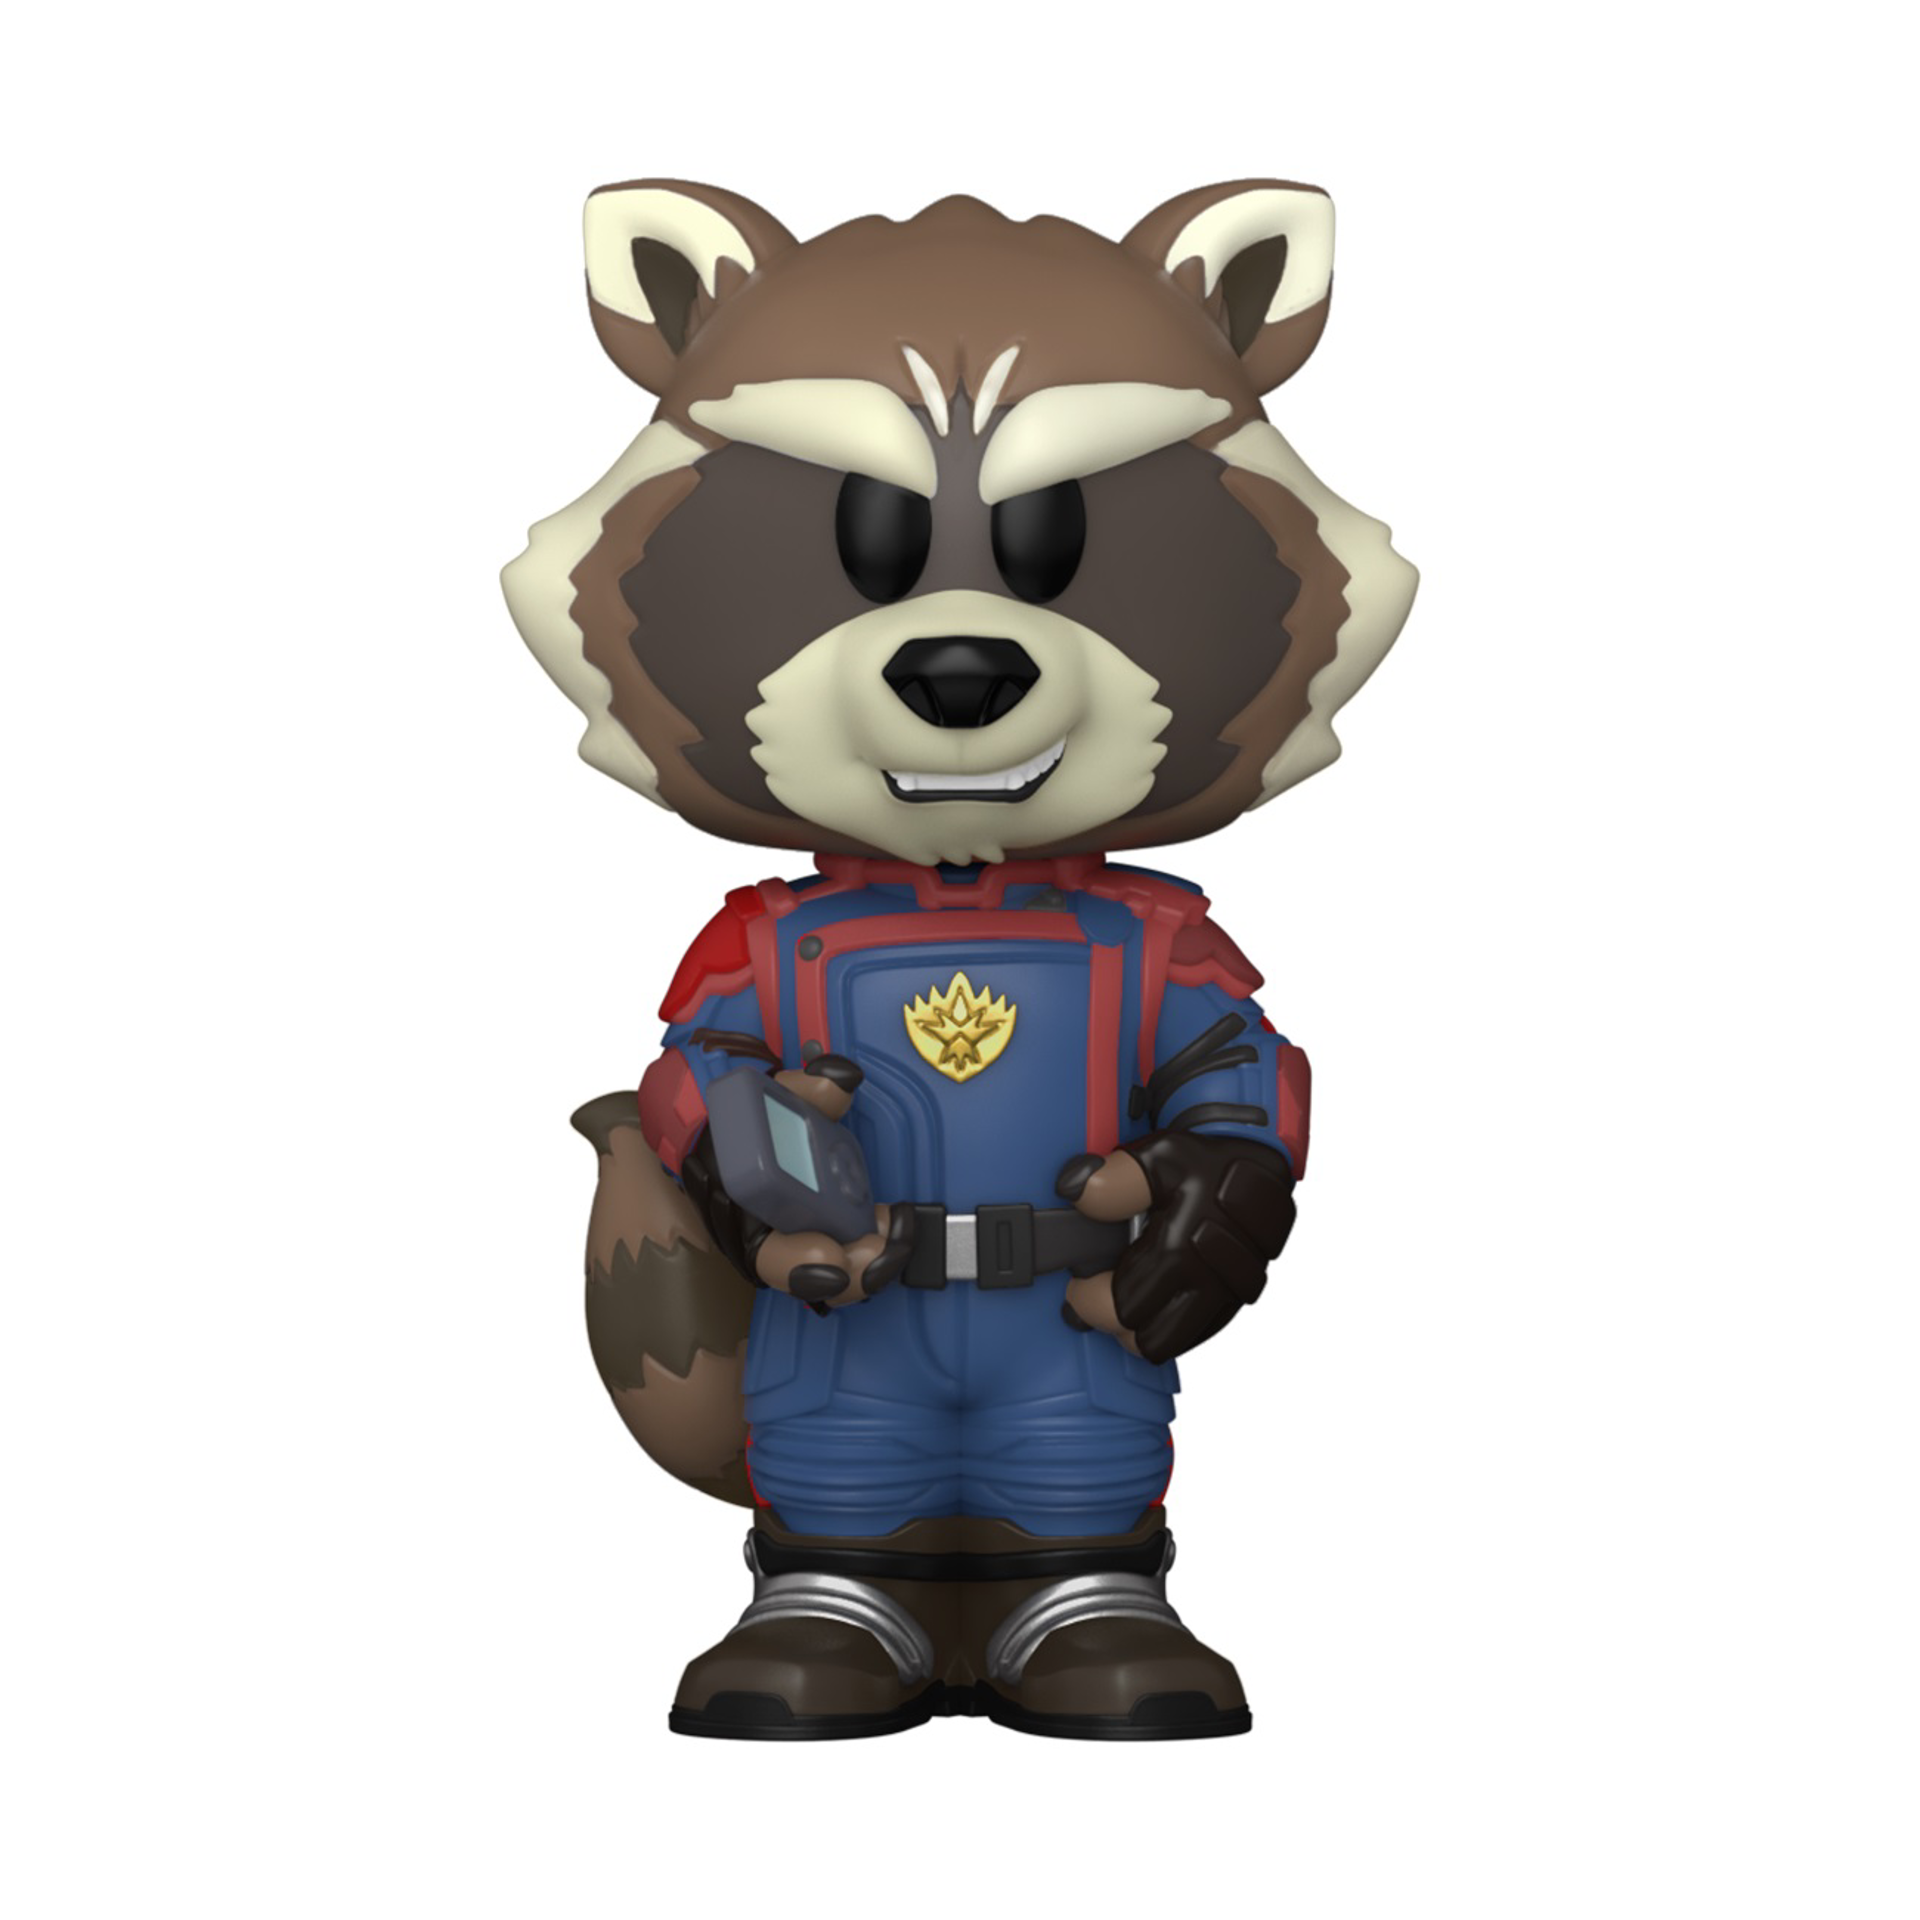 Funko Vinyl Soda: Guardians of the Galaxy 3 - Rocket (chance of special Chase edition)